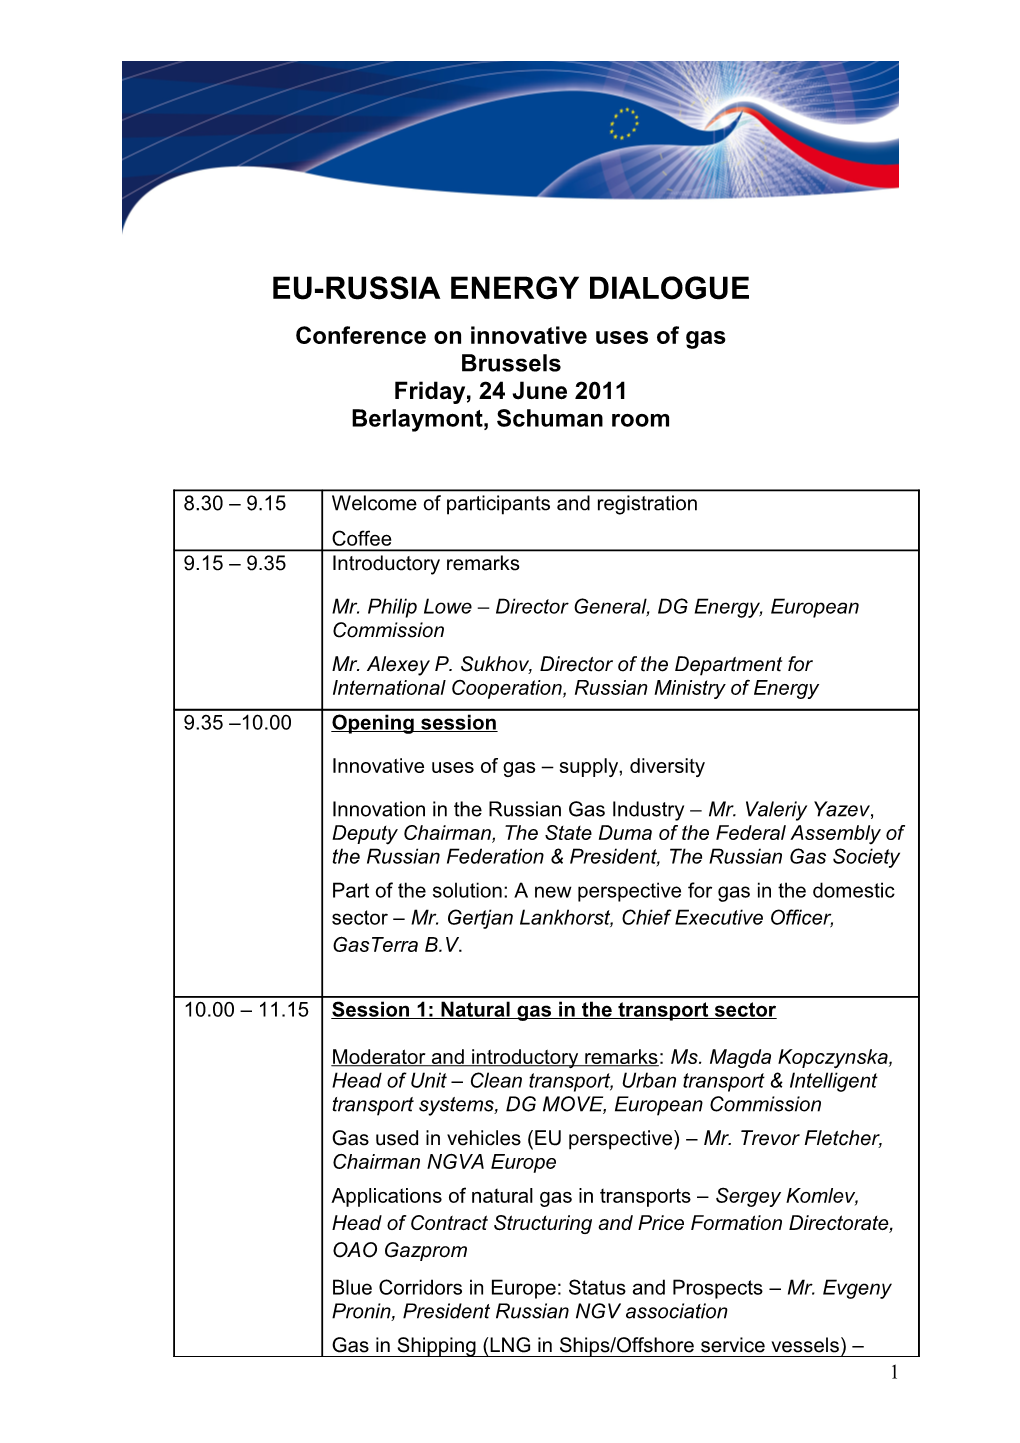 Conference on Innovative Uses of Gas